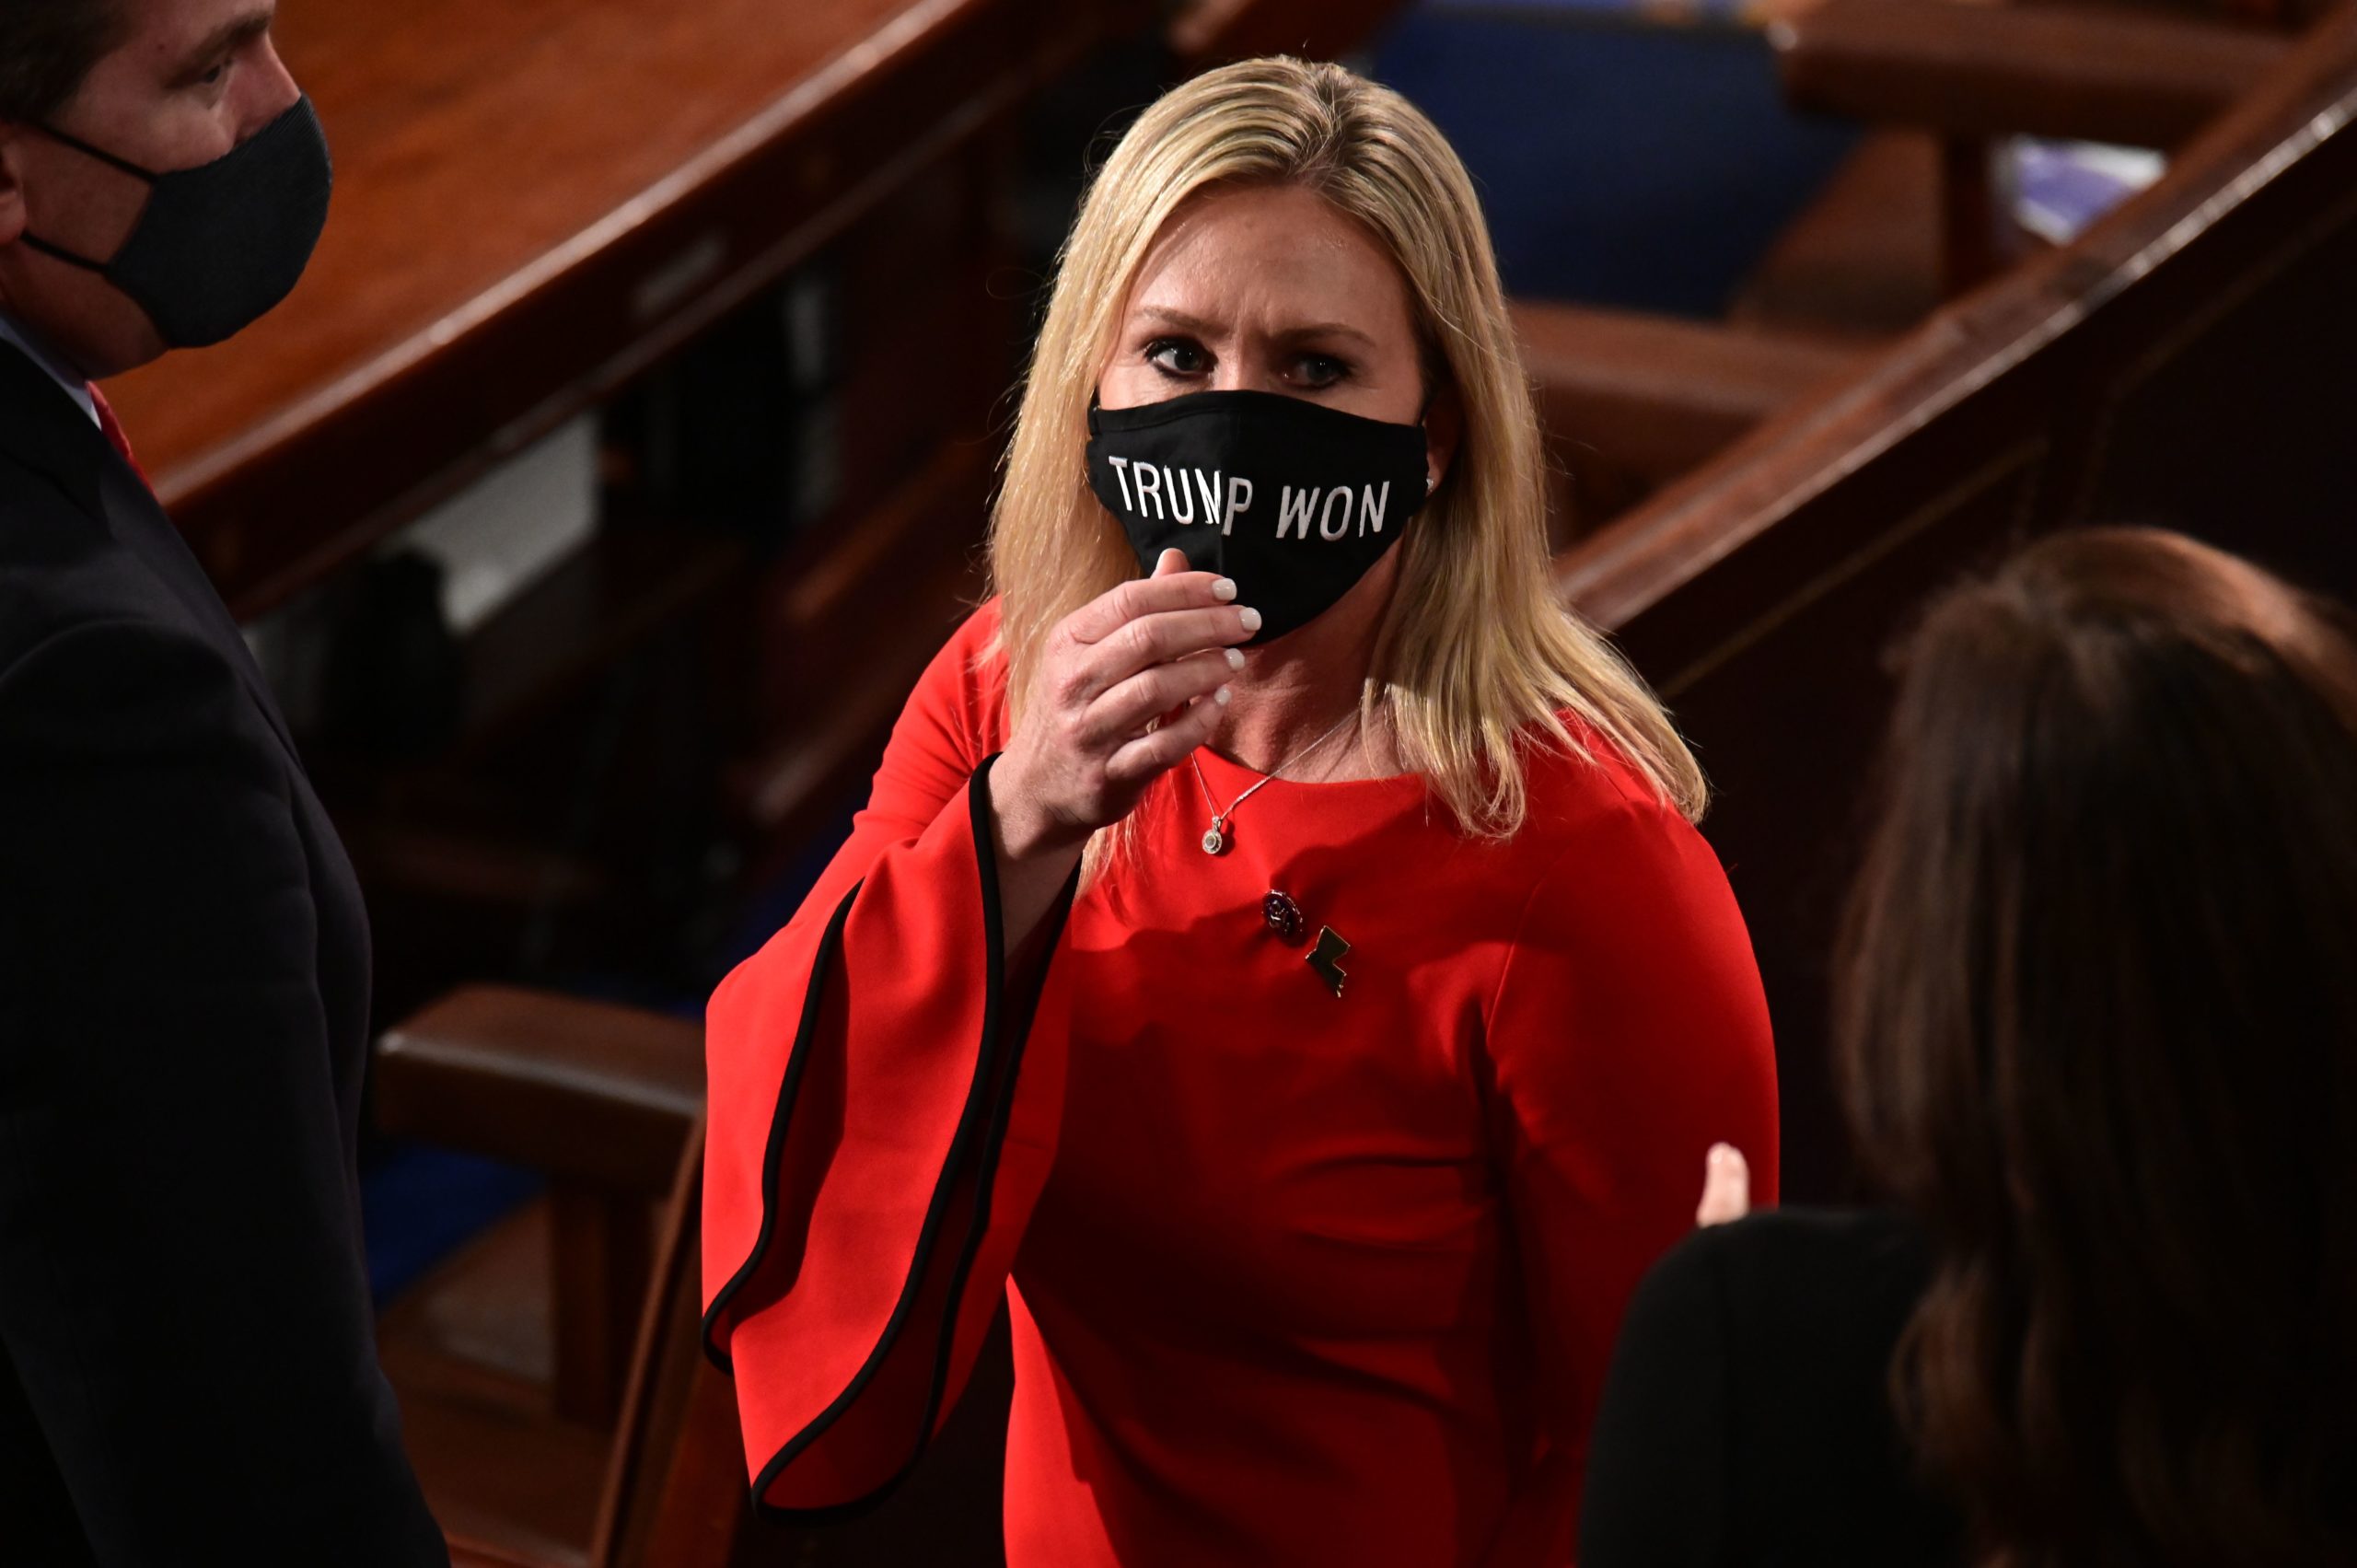 US Rep. Marjorie Taylor Greene (R-GA) wears a "Trump Won" face mask as she arrives on the floor of the House to take her oath of office as a newly elected member of the 117th House of Representatives in Washington, DC on January 3, 2021. (Photo by ERIN SCOTT / POOL / AFP) (Photo by ERIN SCOTT/POOL/AFP via Getty Images)